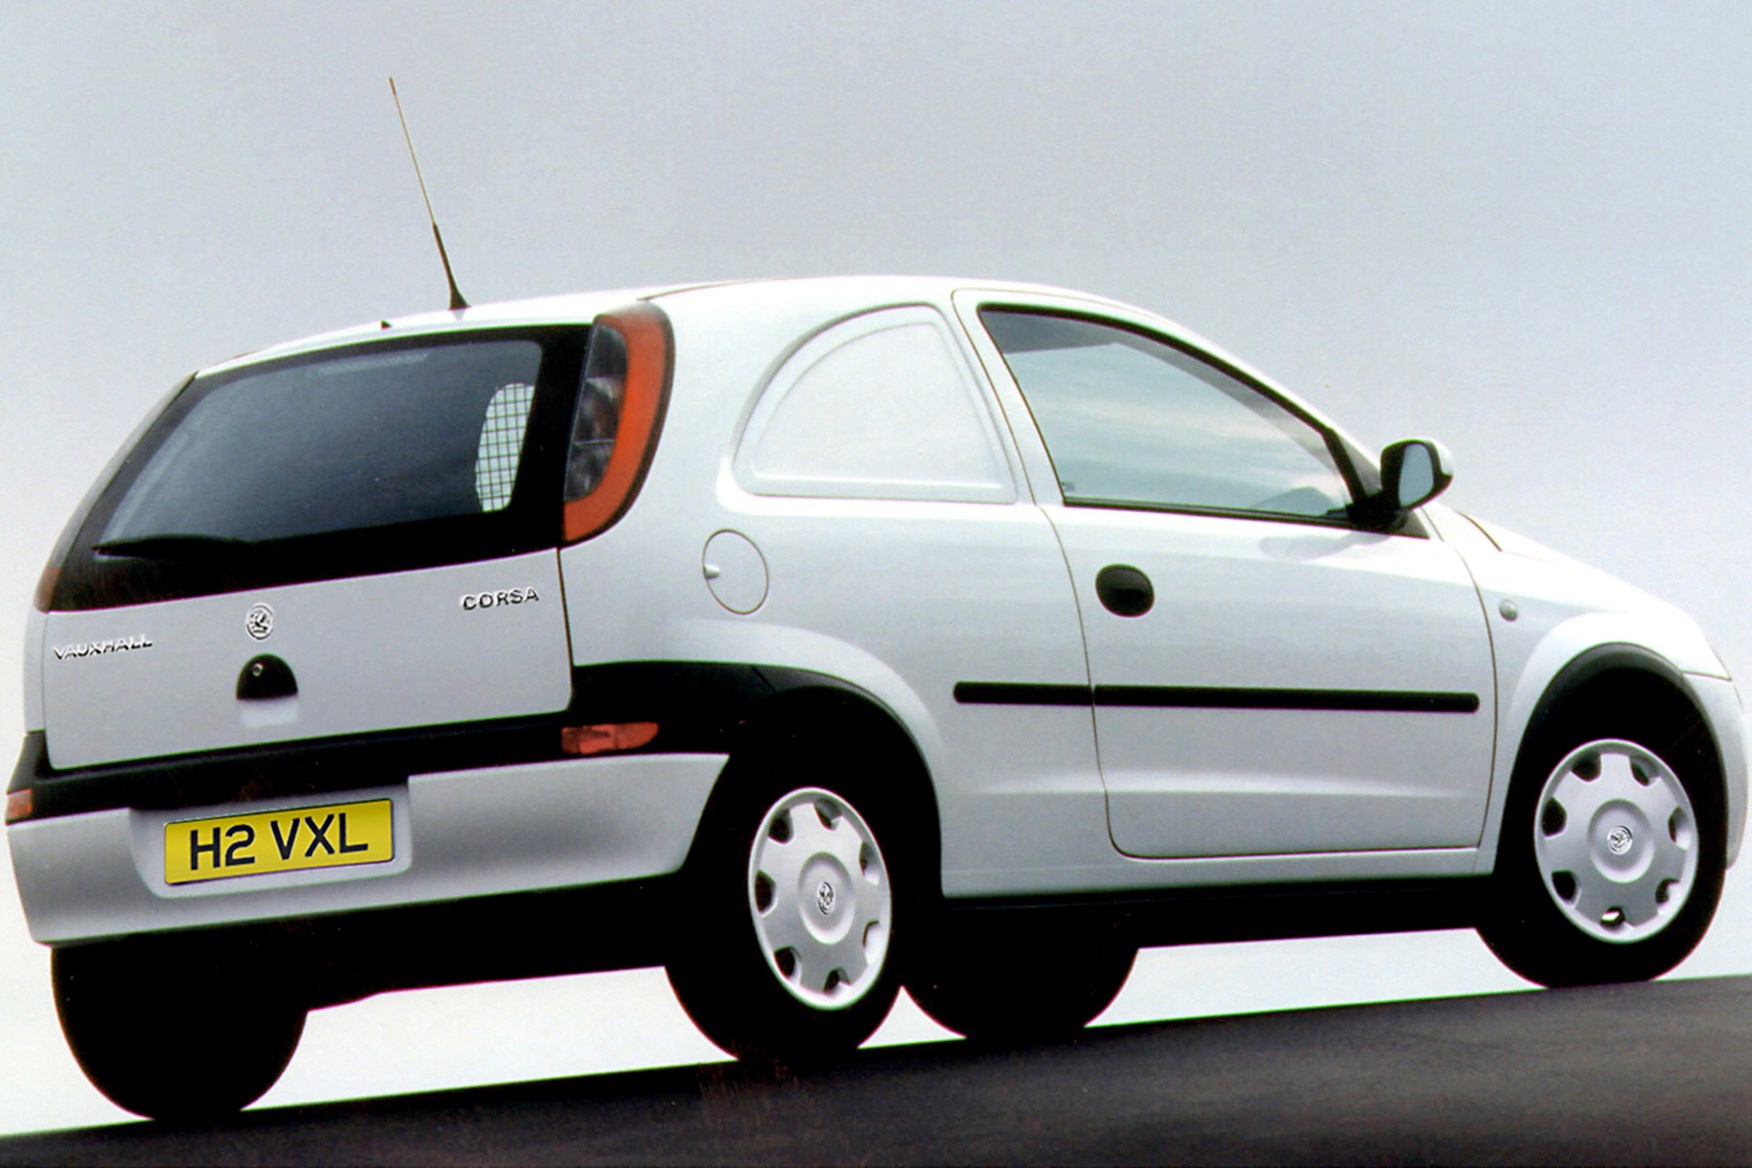 Vauxhall Corsa review on Parkers Vans - rear exterior